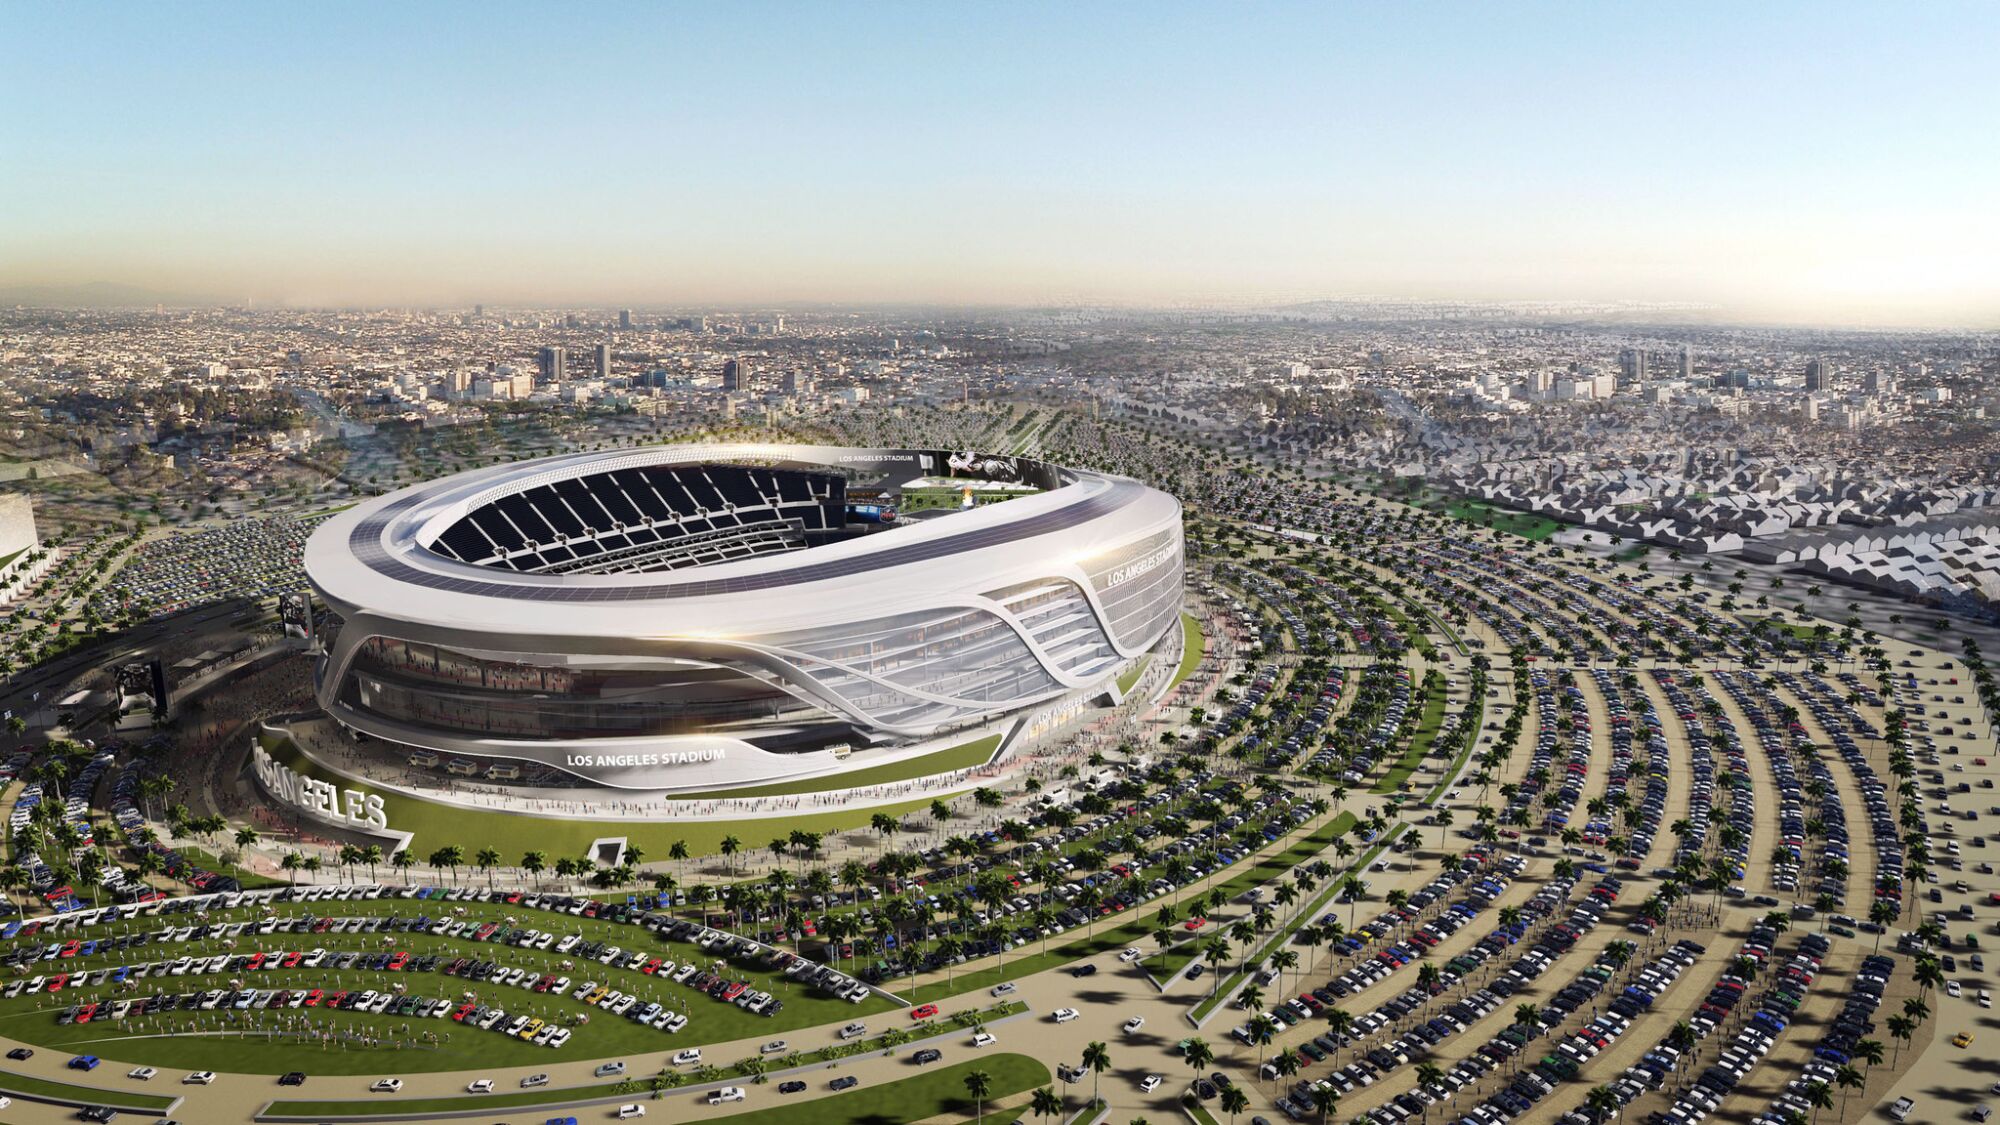 Goldman Sachs has crafted a public-private partnership to build a stadium in Carson.